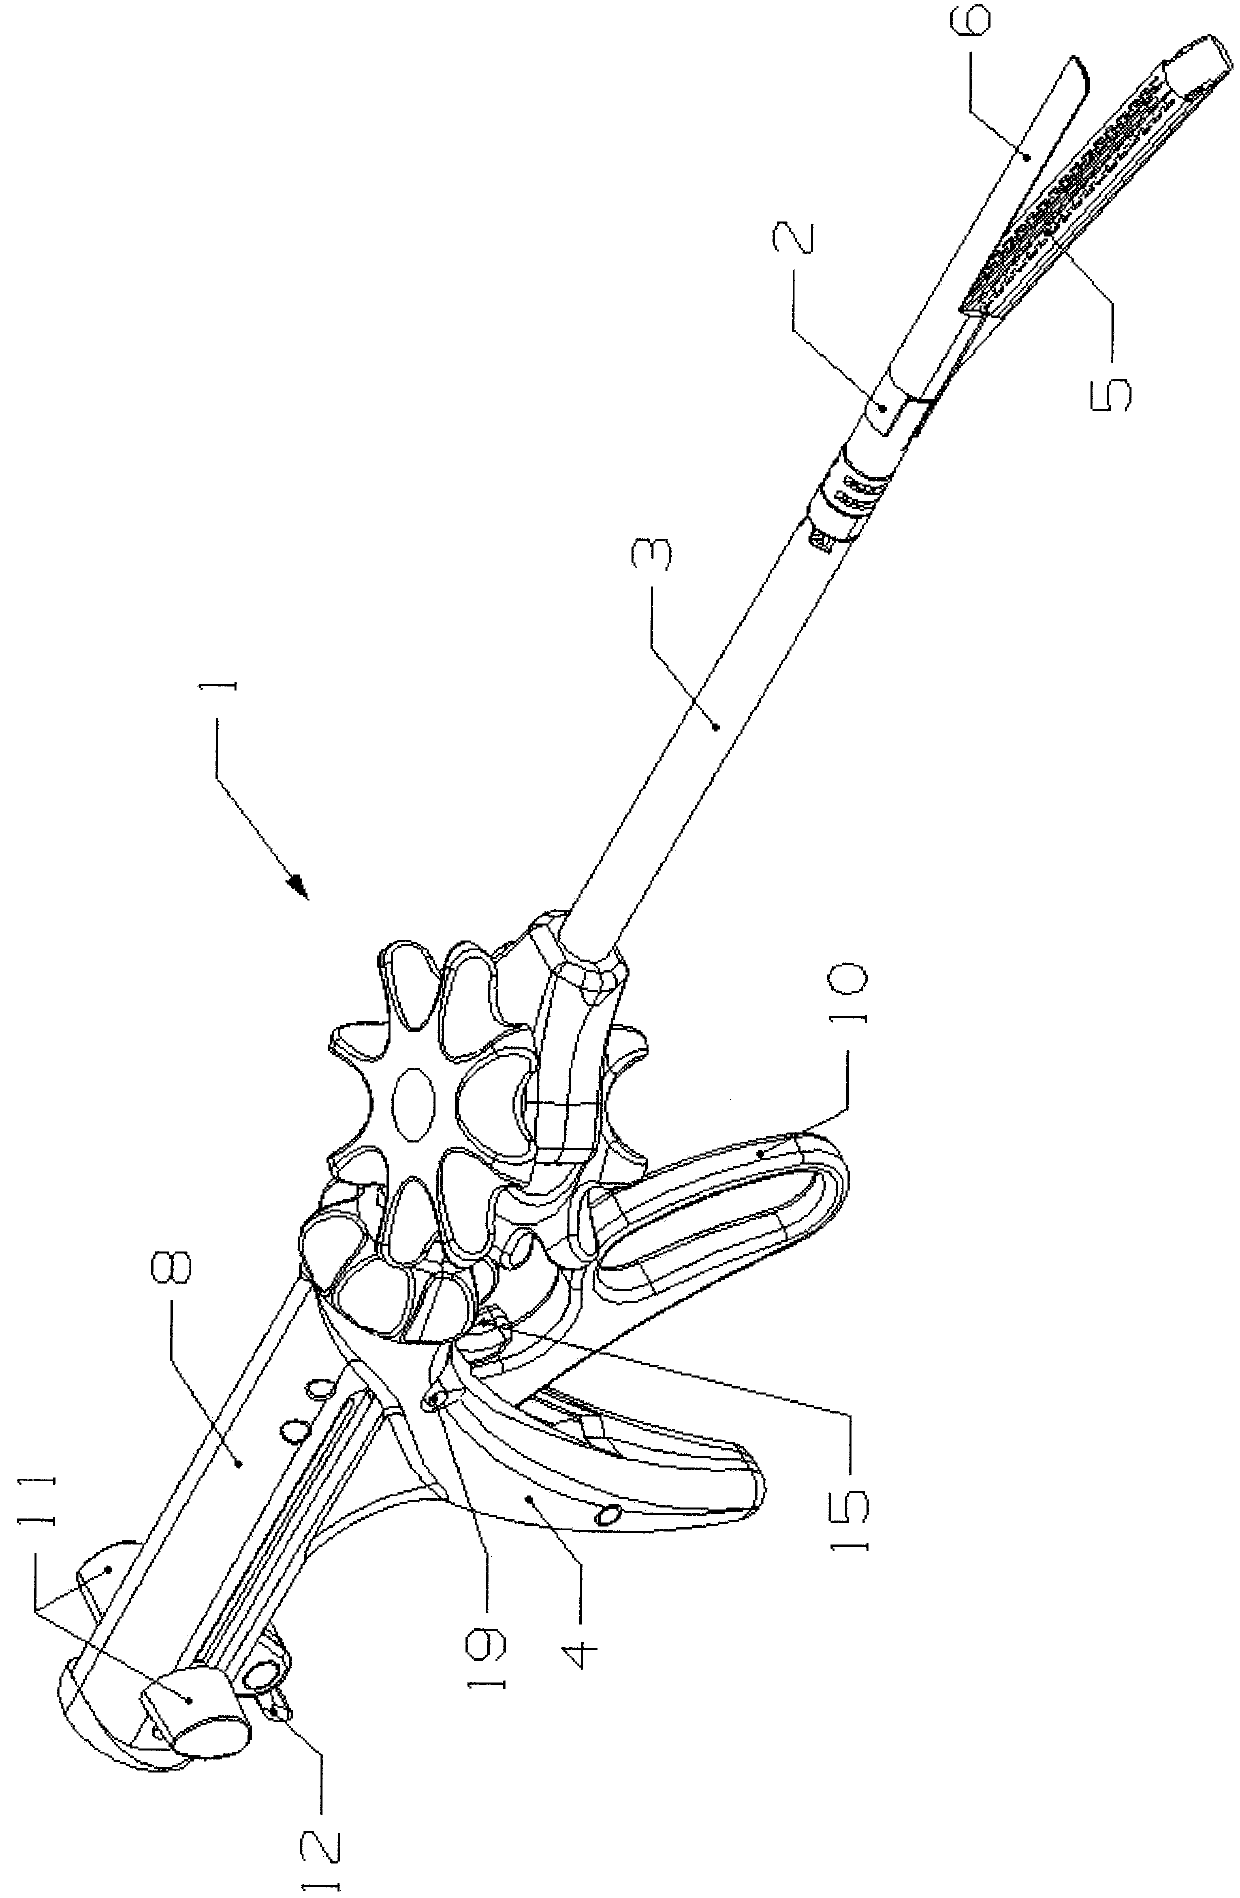 Opening and closing control mechanism of endoscopic surgical stapler